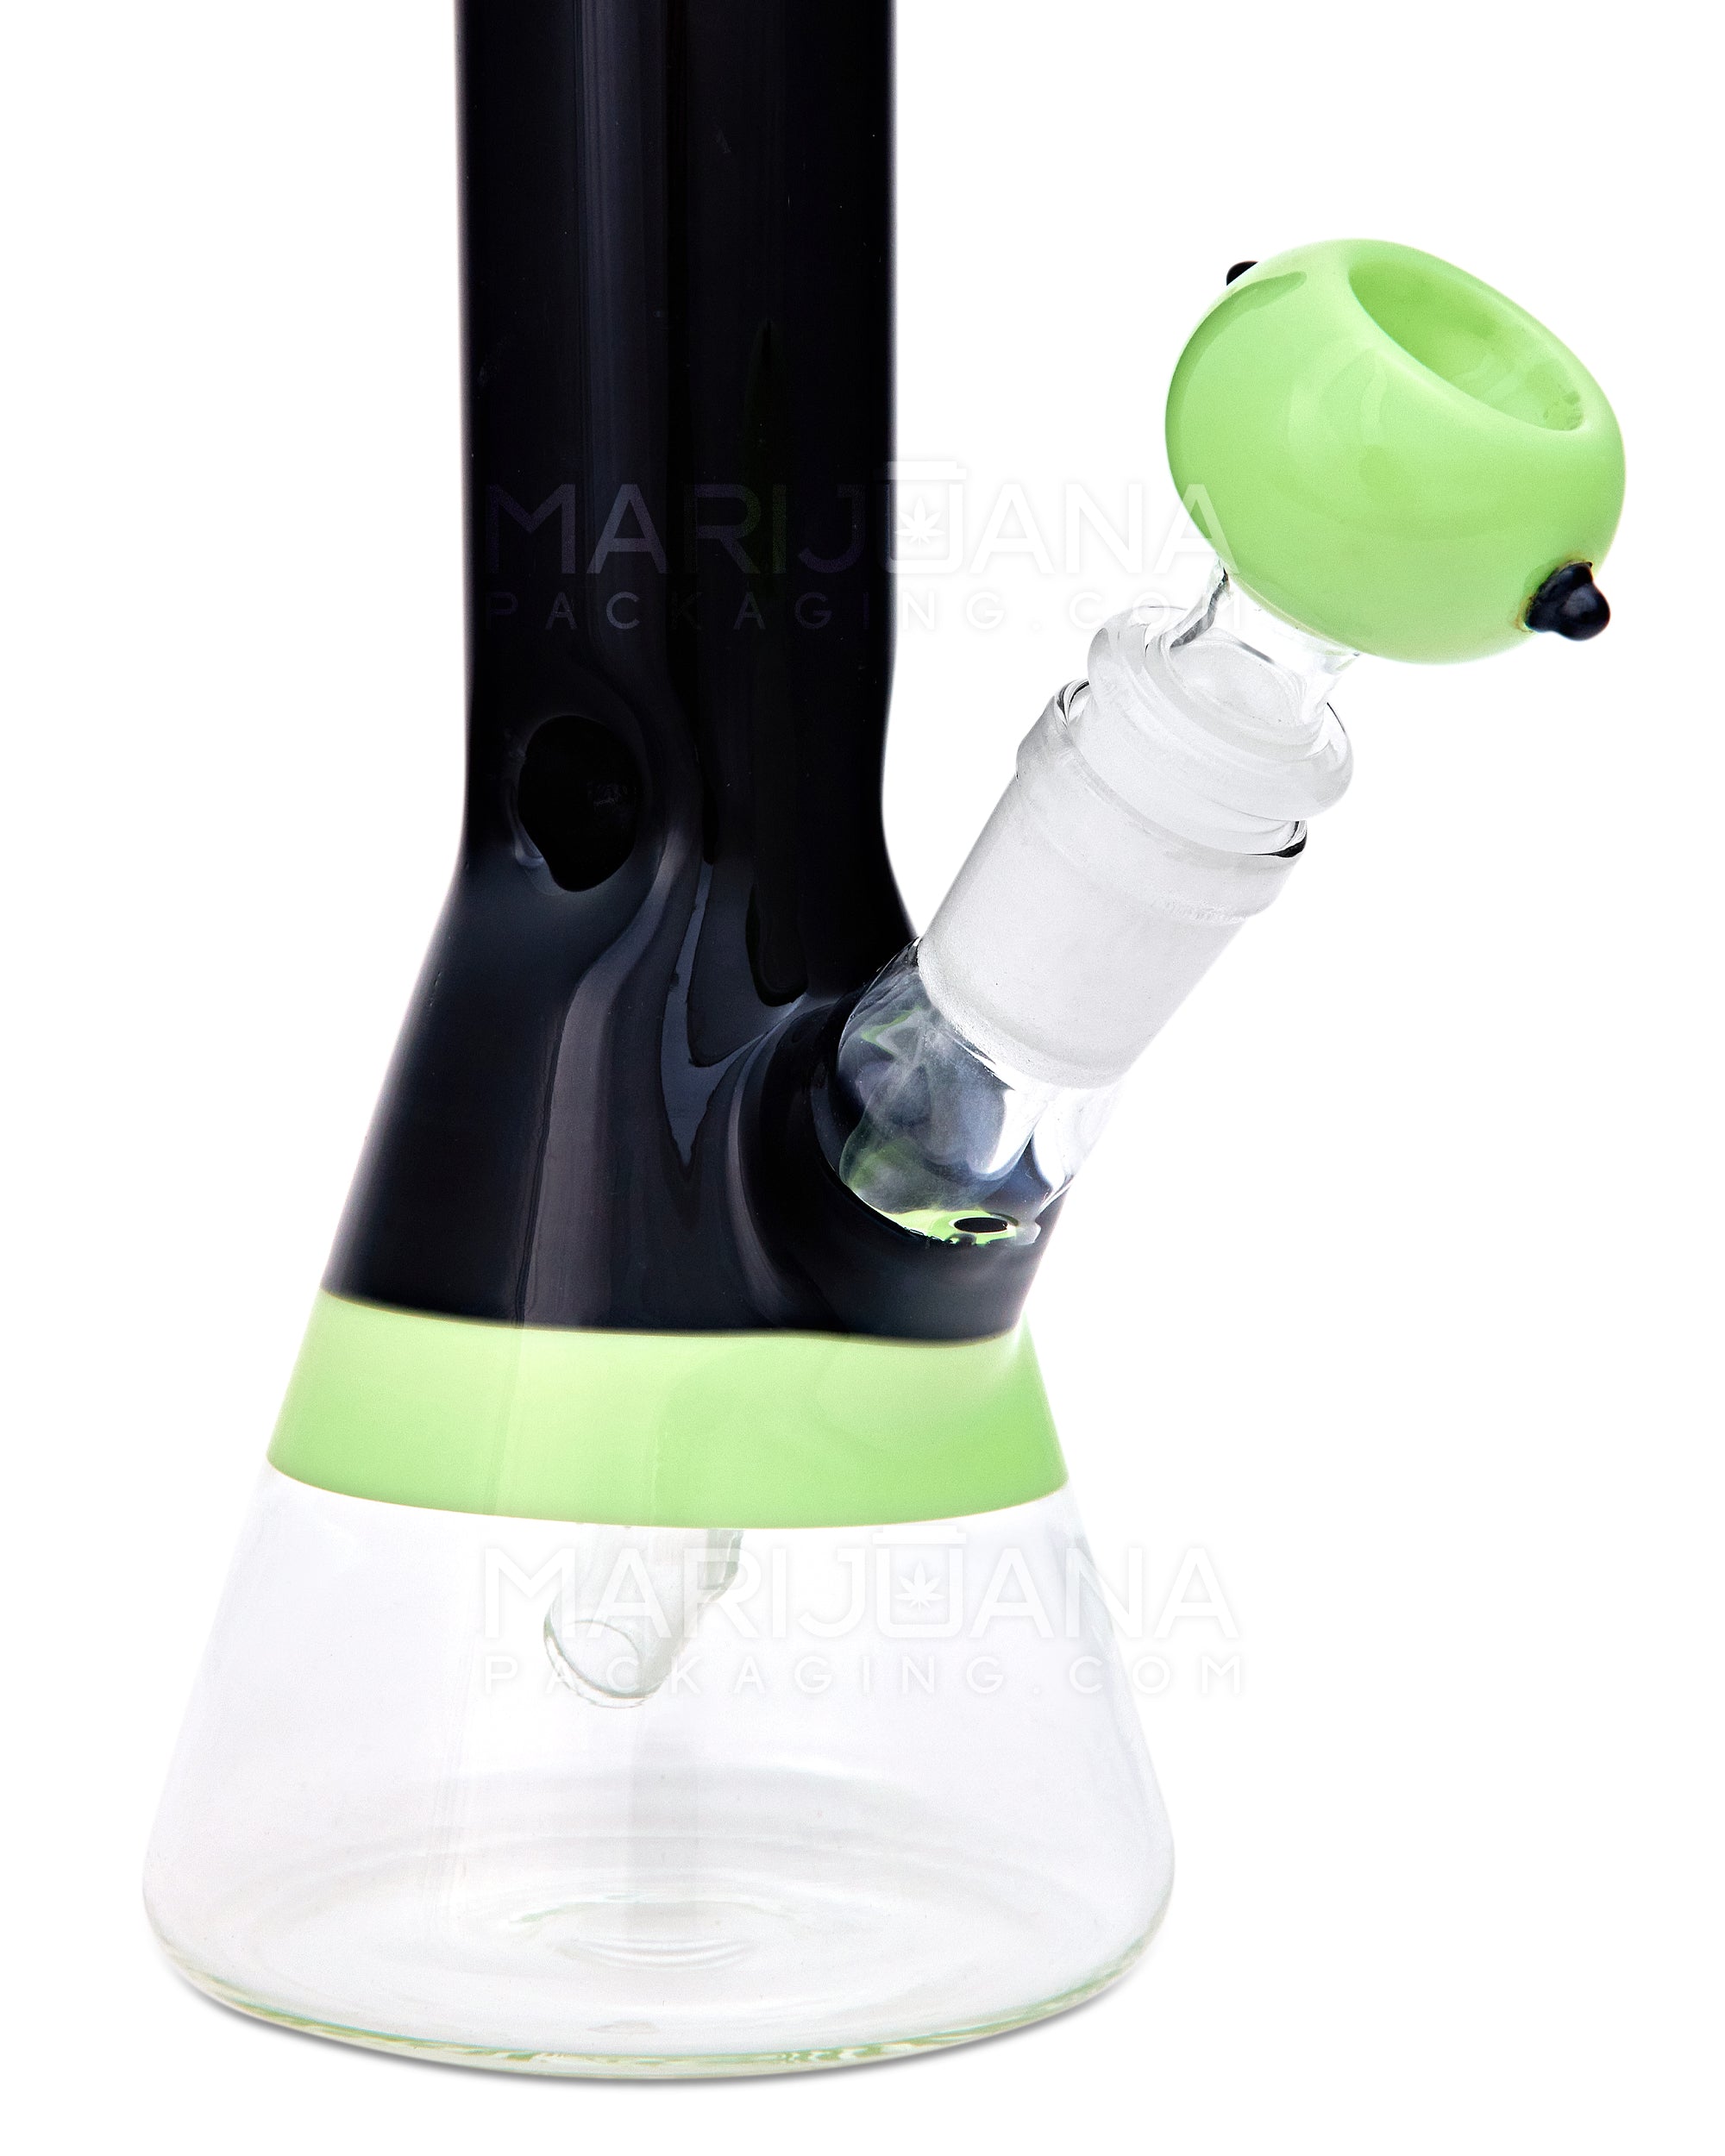 Painted Straight Neck Diffused Downstem Glass Beaker Water Pipe | 10in Tall - 14mm Bowl - Slime & Black - 3